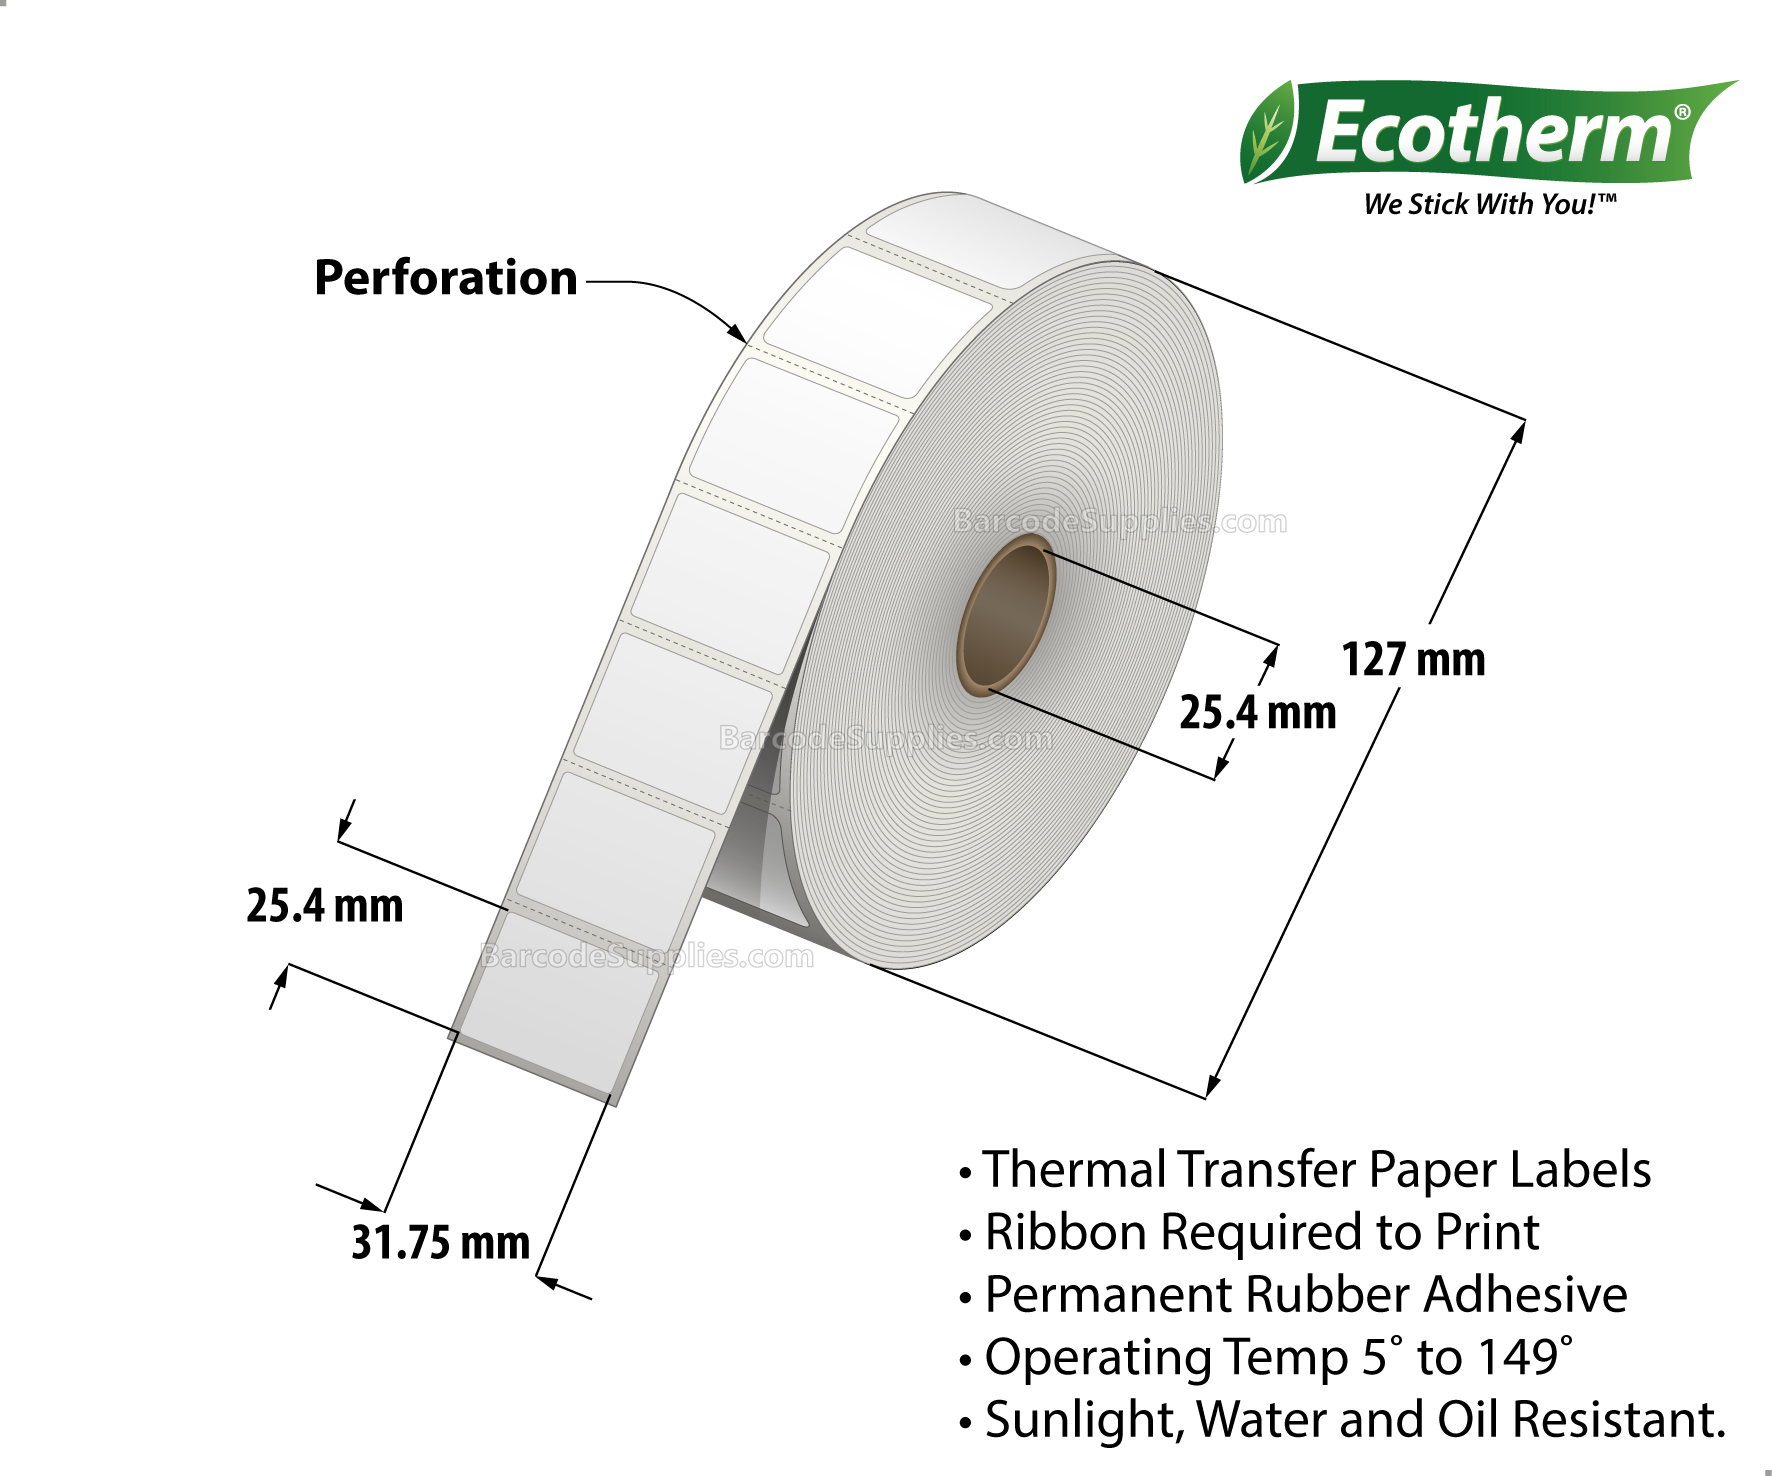 1.25 x 1 Thermal Transfer White Labels With Rubber Adhesive - Perforated - 2580 Labels Per Roll - Carton Of 6 Rolls - 15480 Labels Total - MPN: ECOTHERM25101-6